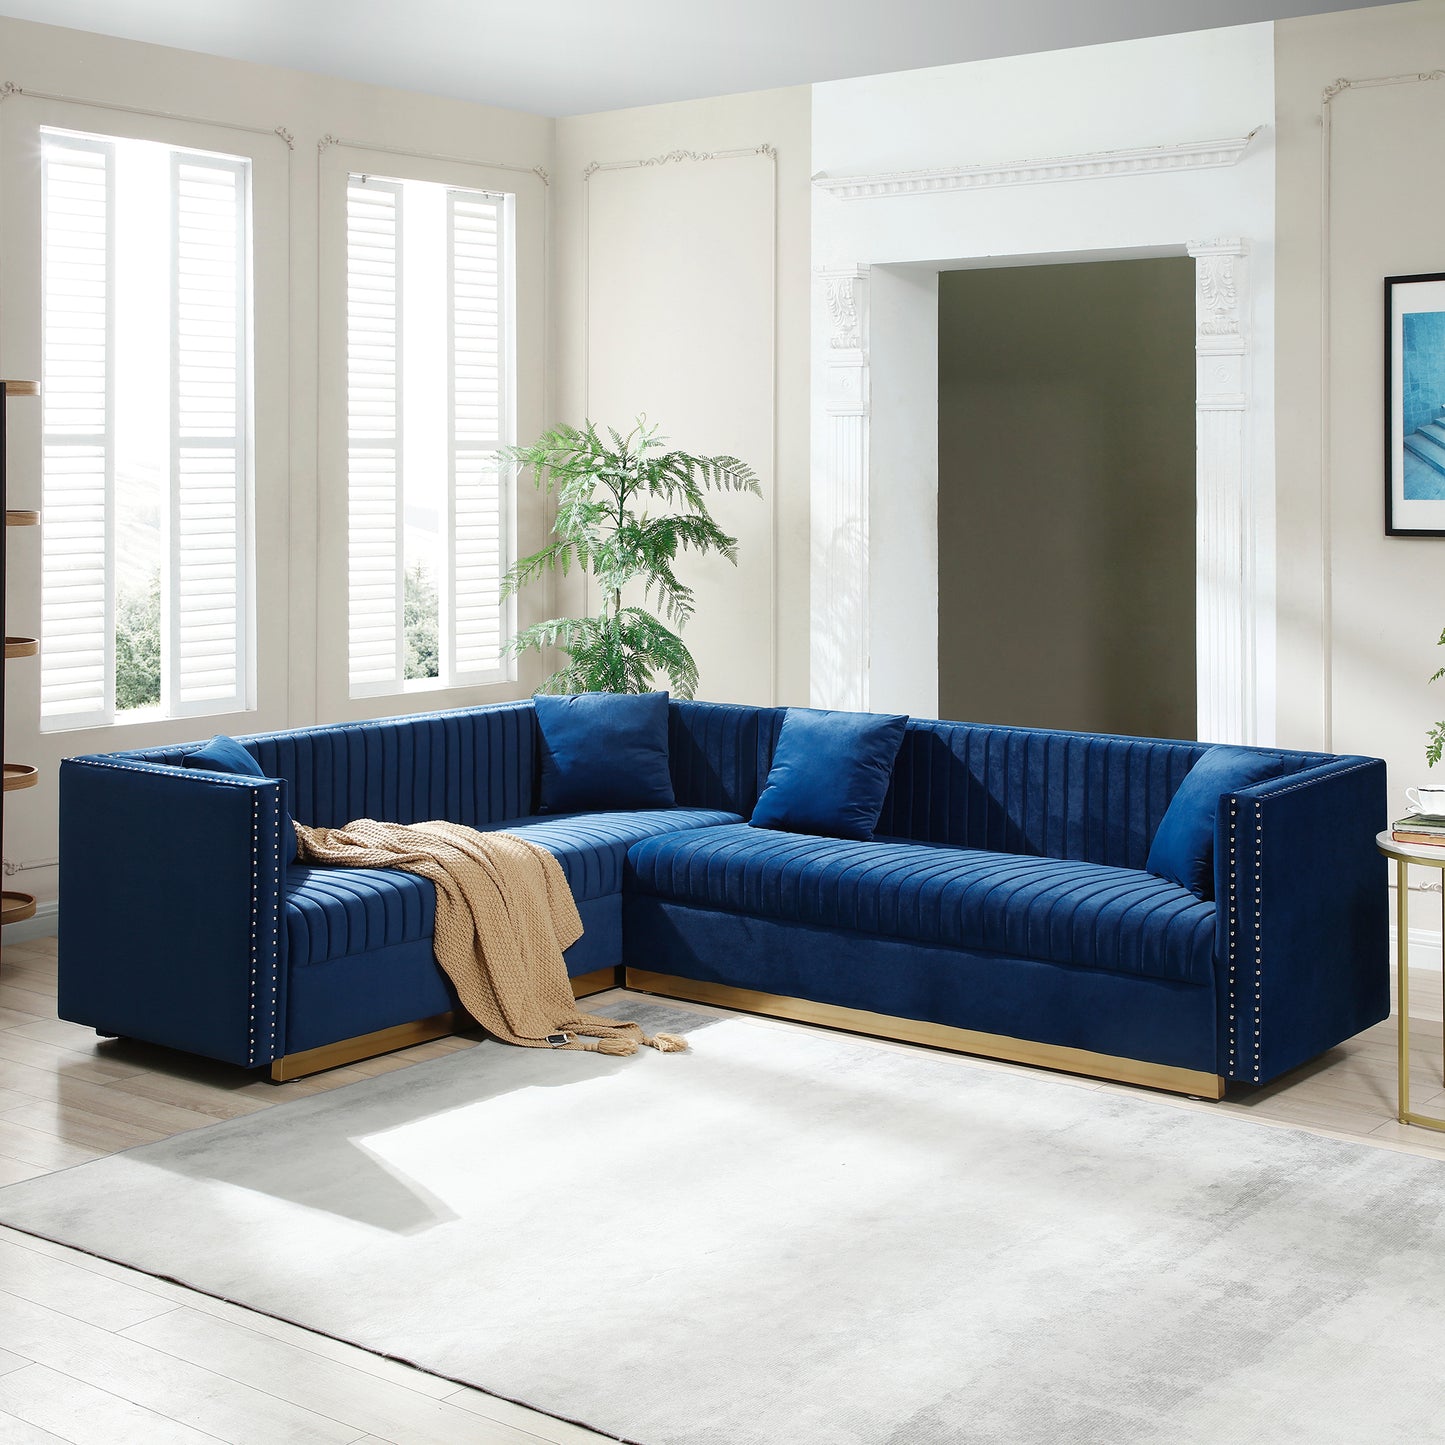 Contemporary Vertical Channel Tufted Velvet Sectional Sofa Modern Upholstered Corner Couch for Living Room Apartment with 4 pillows,Blue